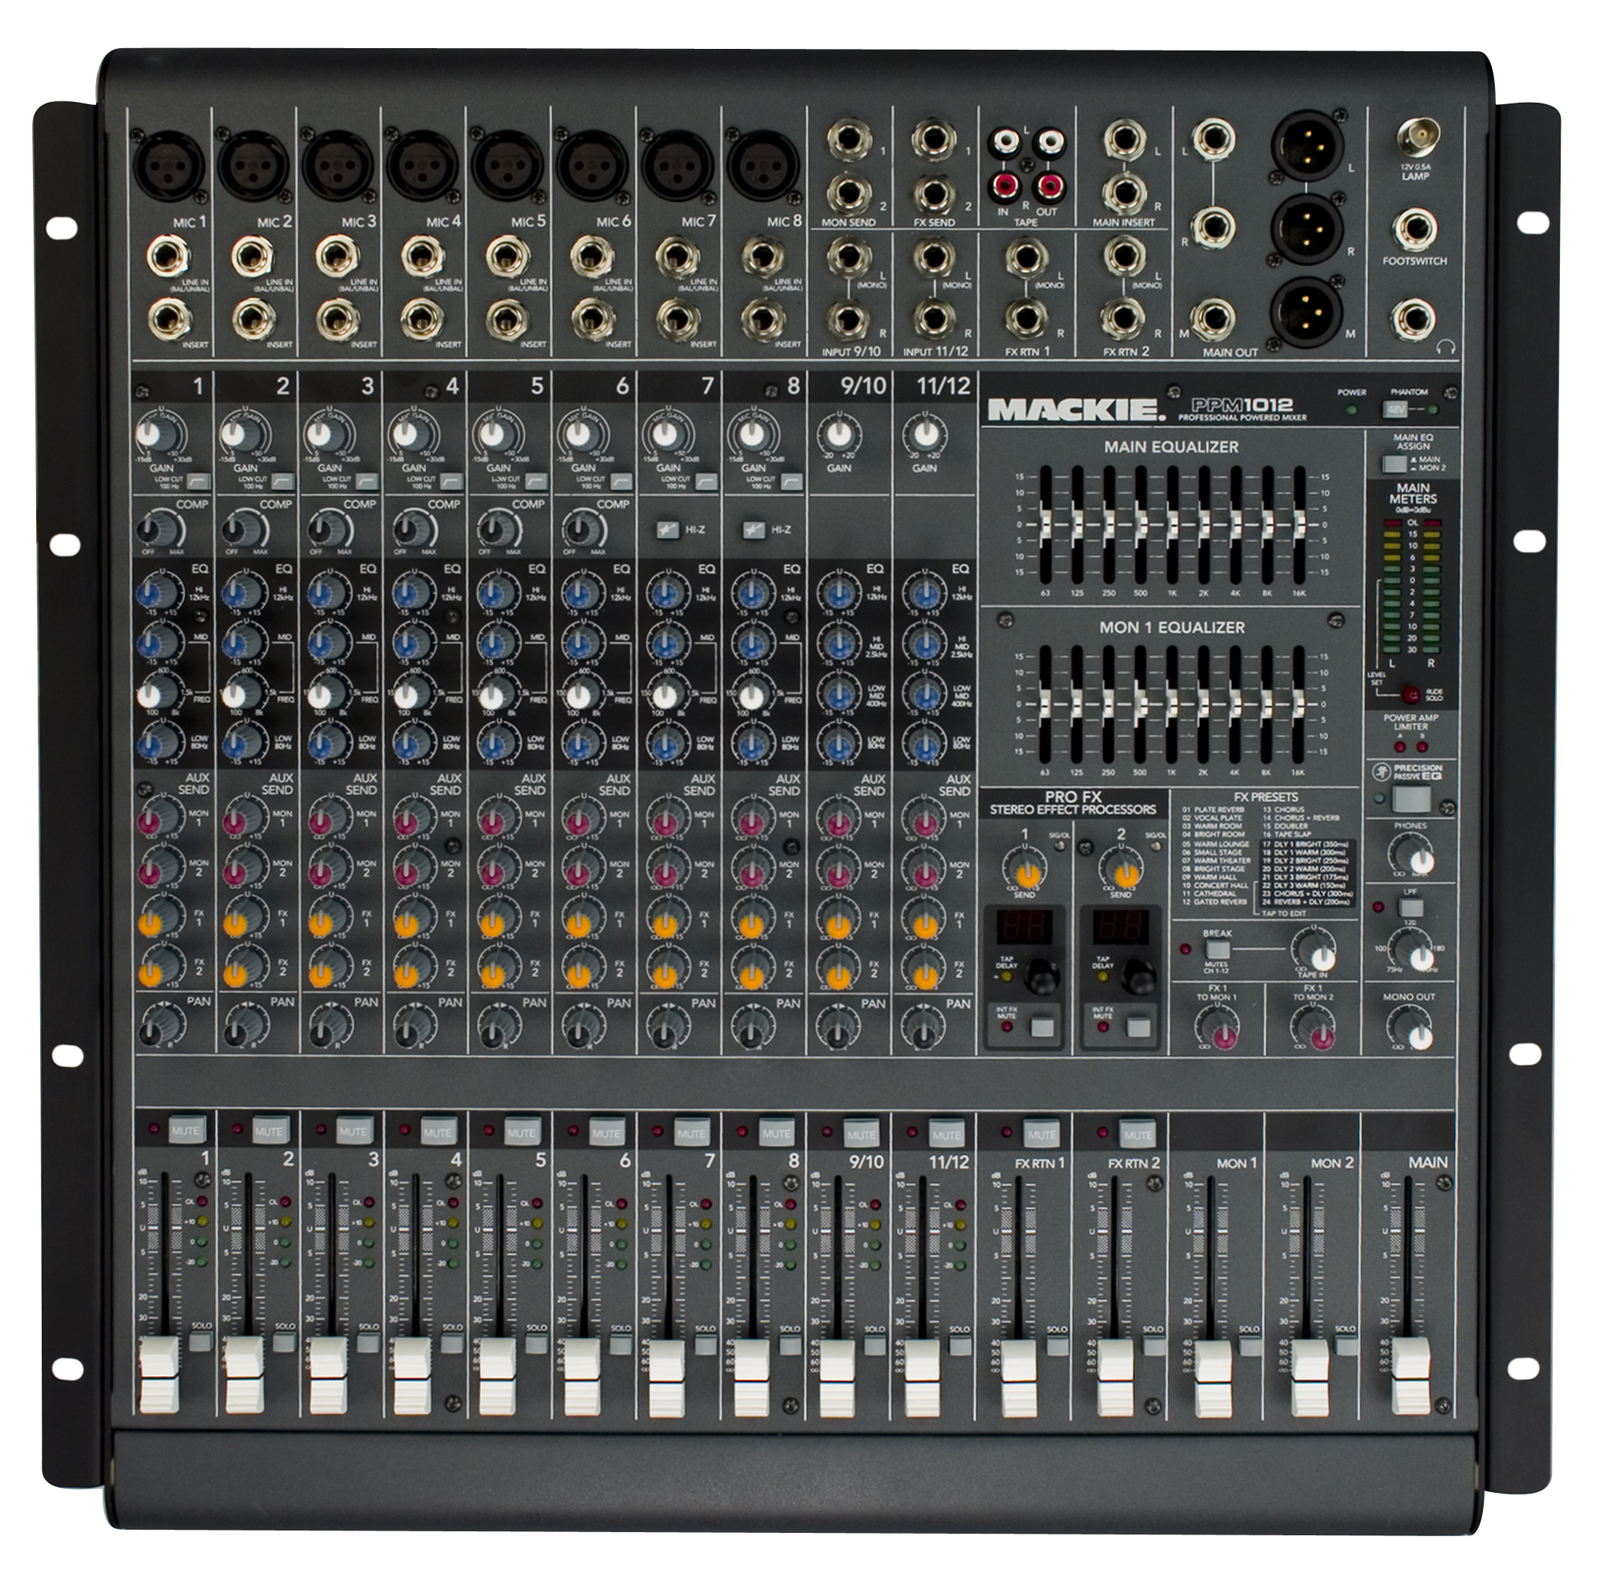 Mackie Mackie PPM1012 Powered Stereo Mixer, 1600 Watts, 12-Channel